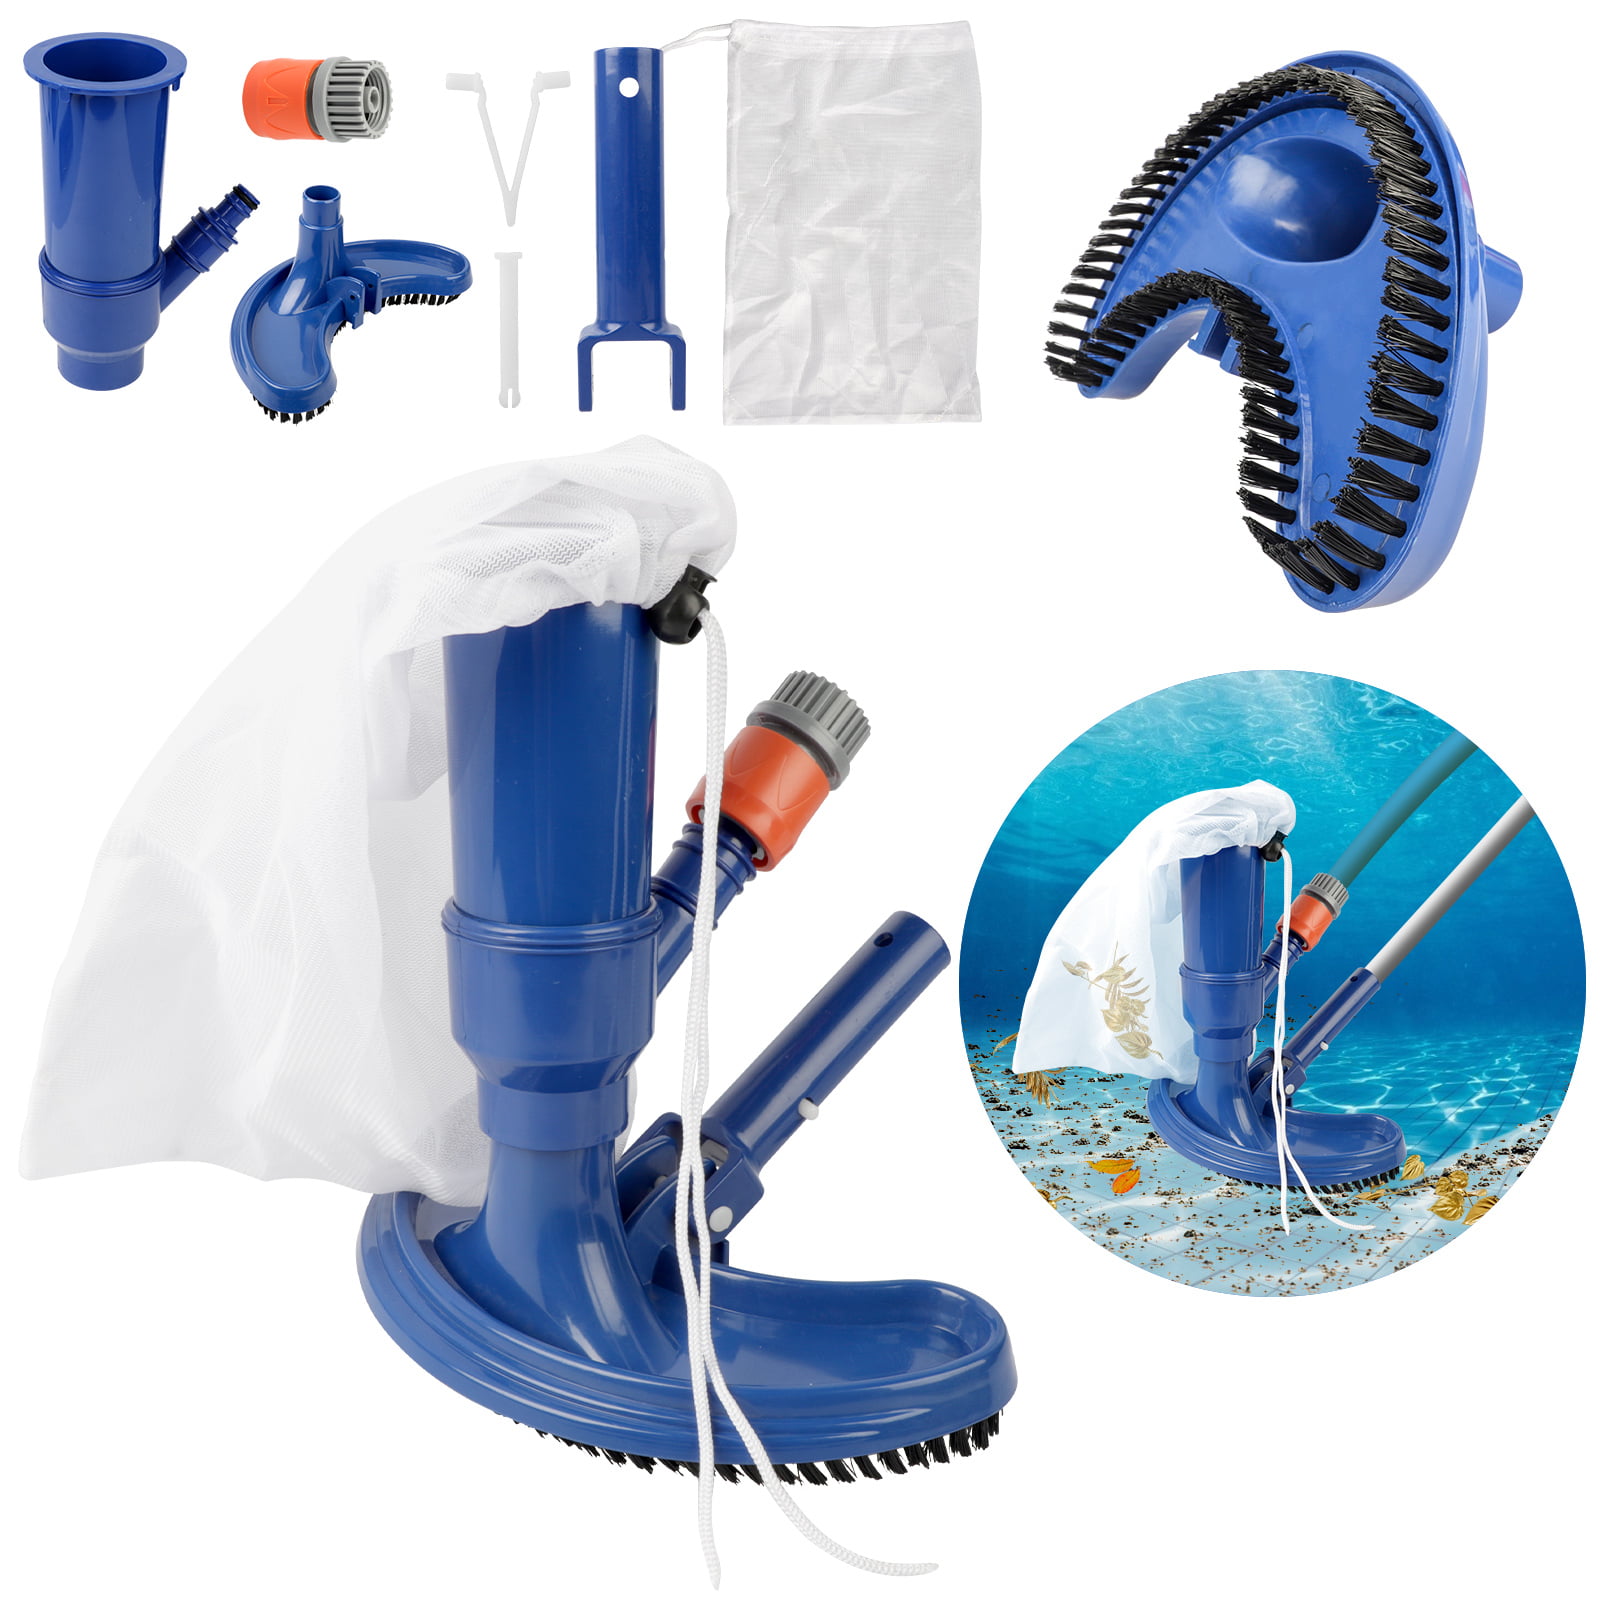 Pool Cleaner Portable Swimming Pool Fountain Vacuum Brush Cleaner Cleaning Tool,Can Be Connected to Garden Hose,Vacuum Cleaner with Mesh Bag Above Ground Center Pond Fountain 5-Pole Section Blue